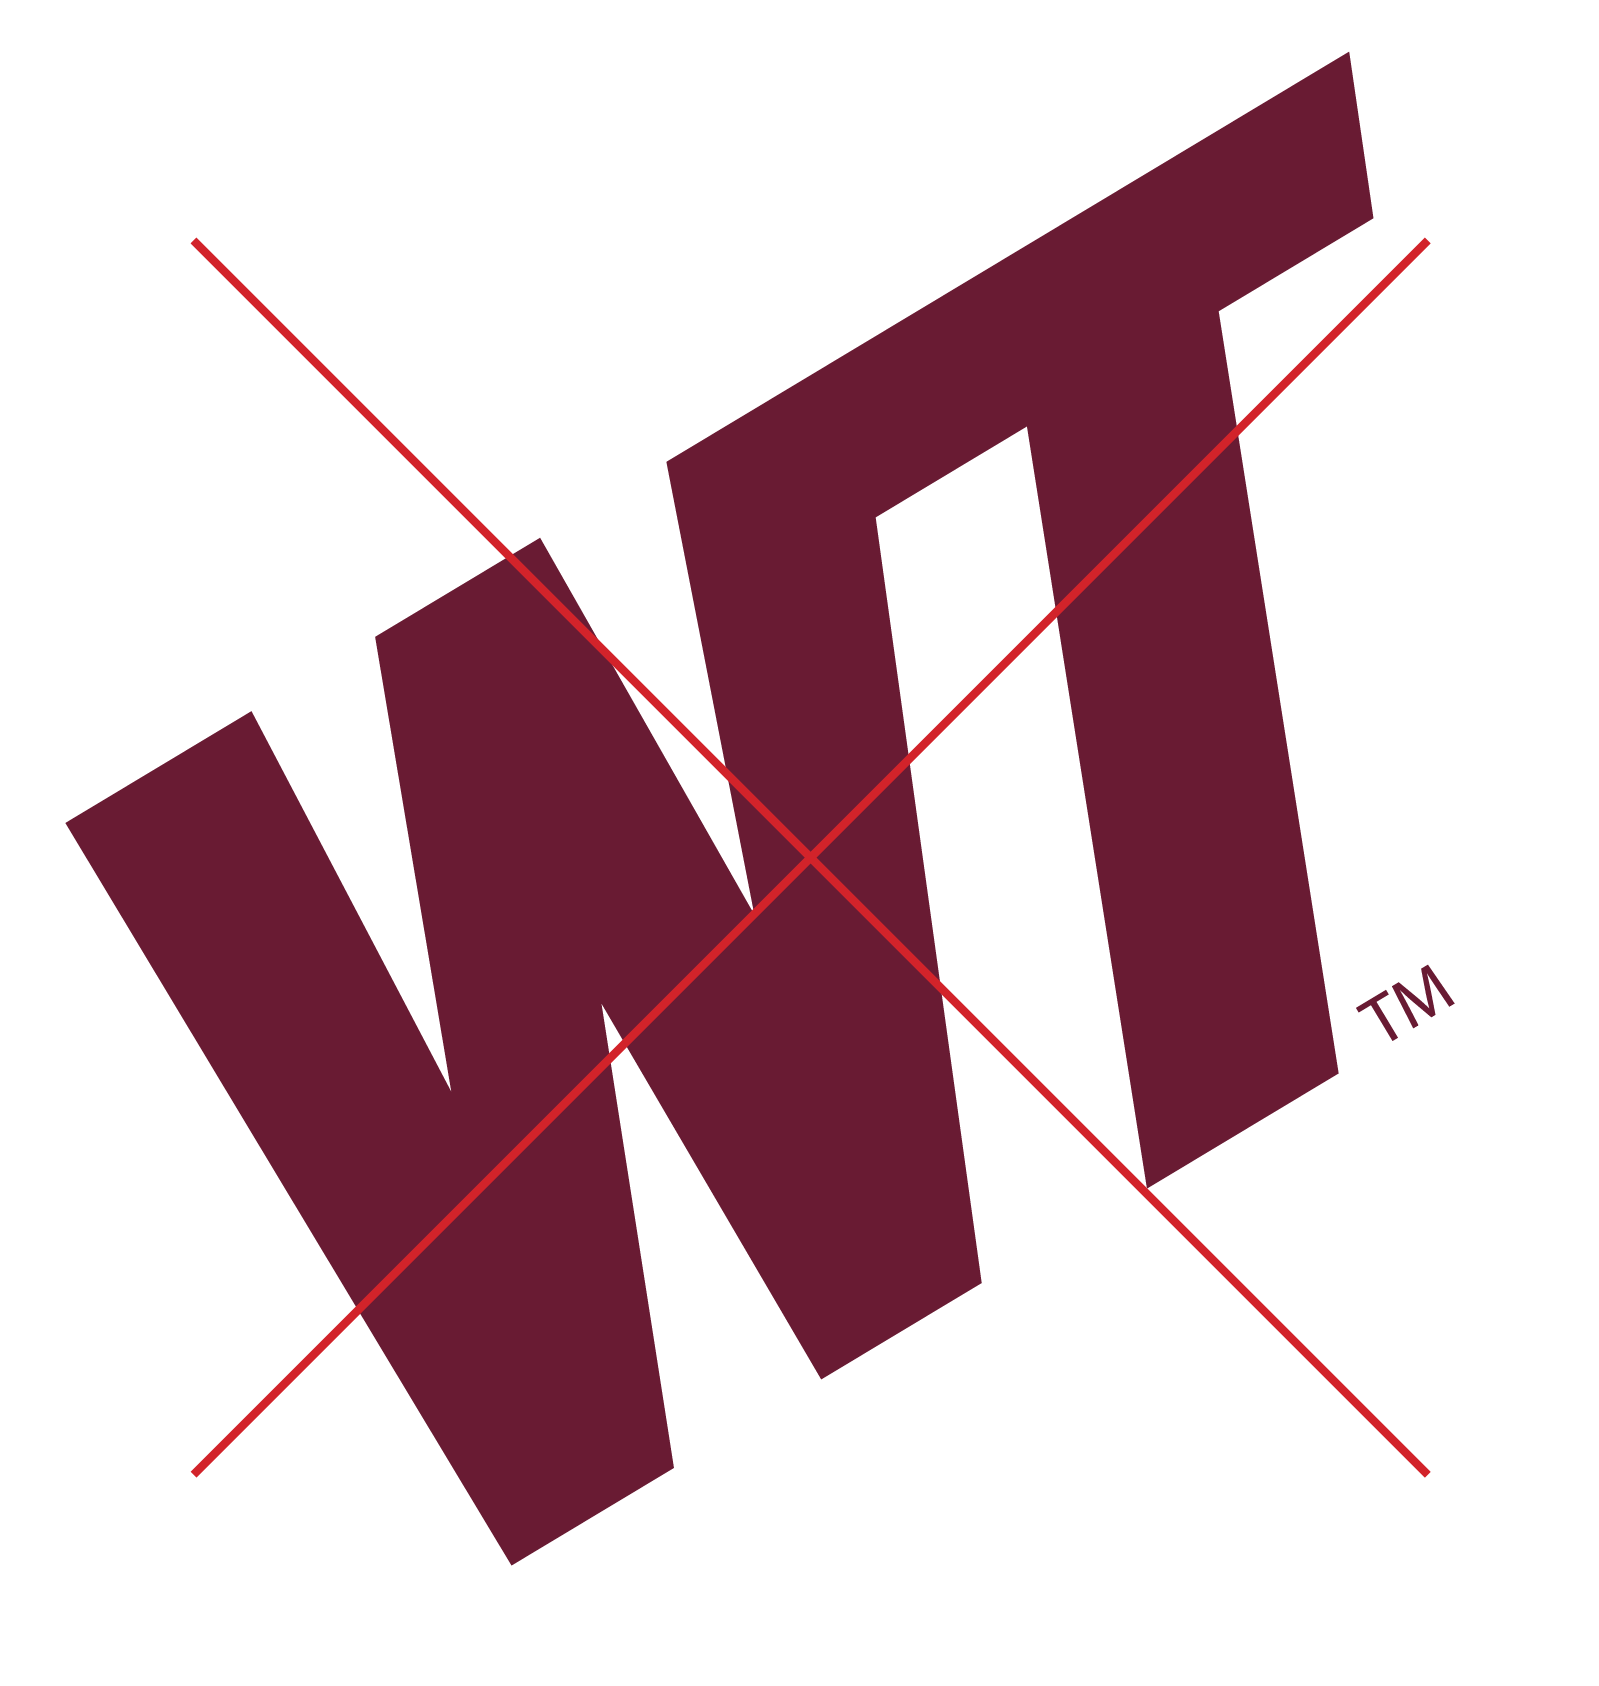 WT' Letter Logo Template by Md Jahidul99 on Dribbble